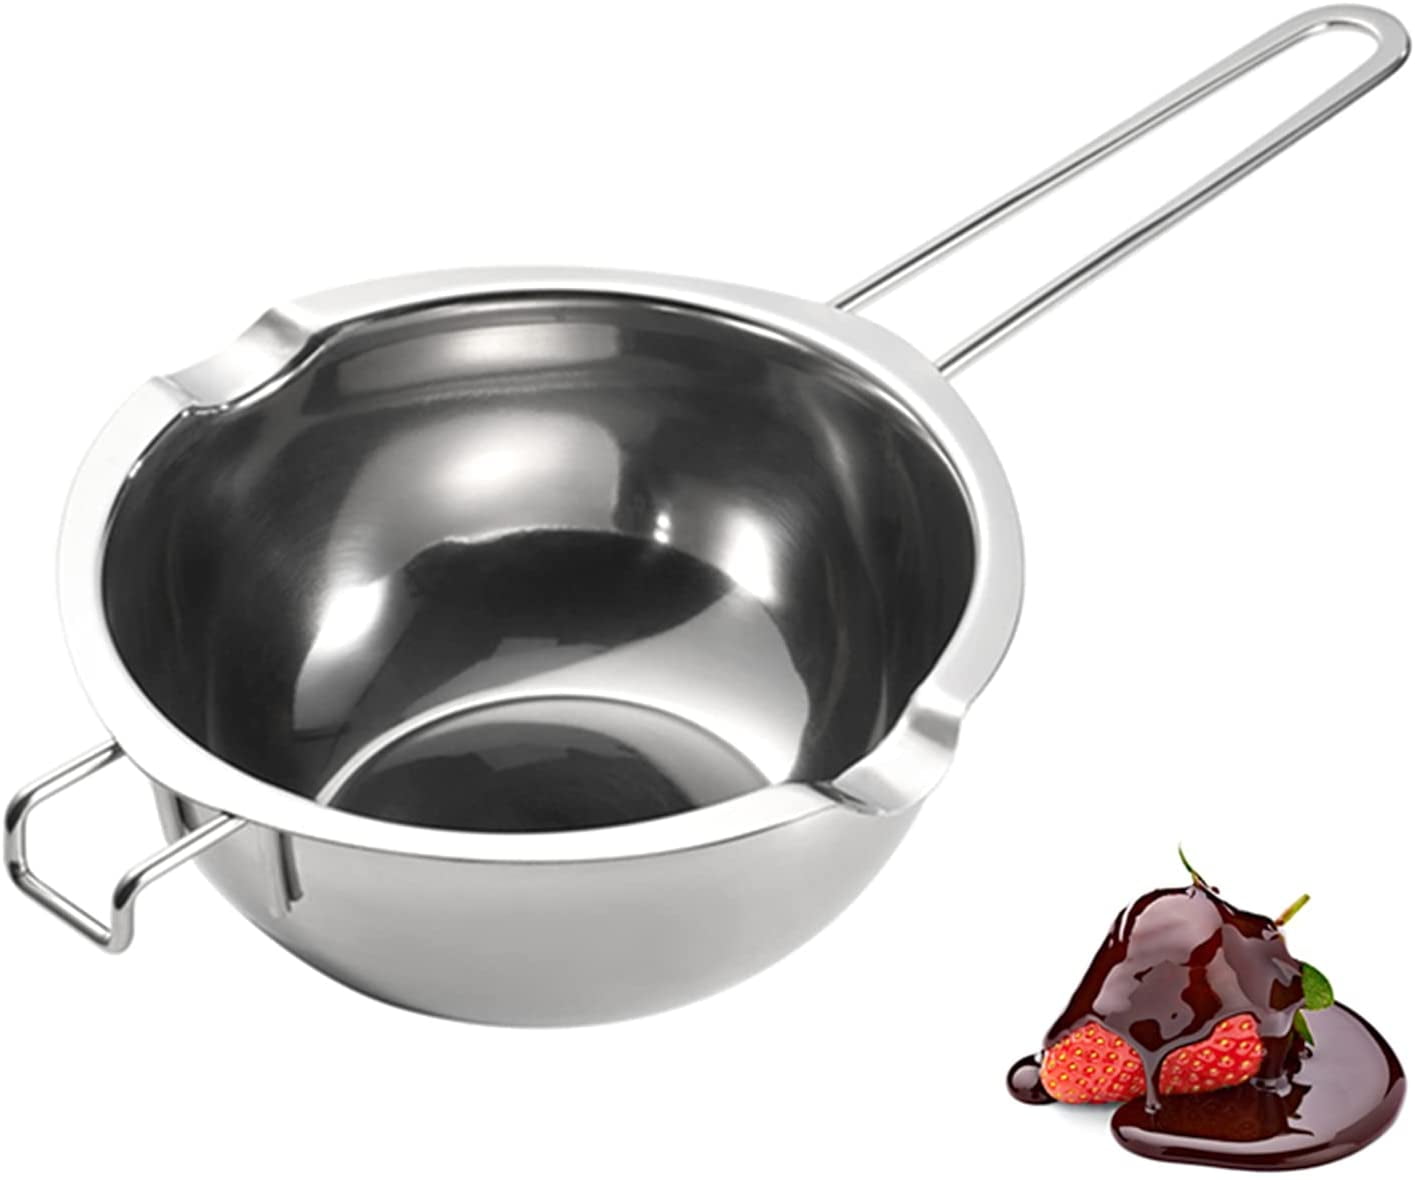 BESTonZON Stainless Steel Melting Pot Double Boiler Pot Milk Warmer Bowl for Kitchen Melting Chocolate Wax Candy Candle Butter Making Blue 